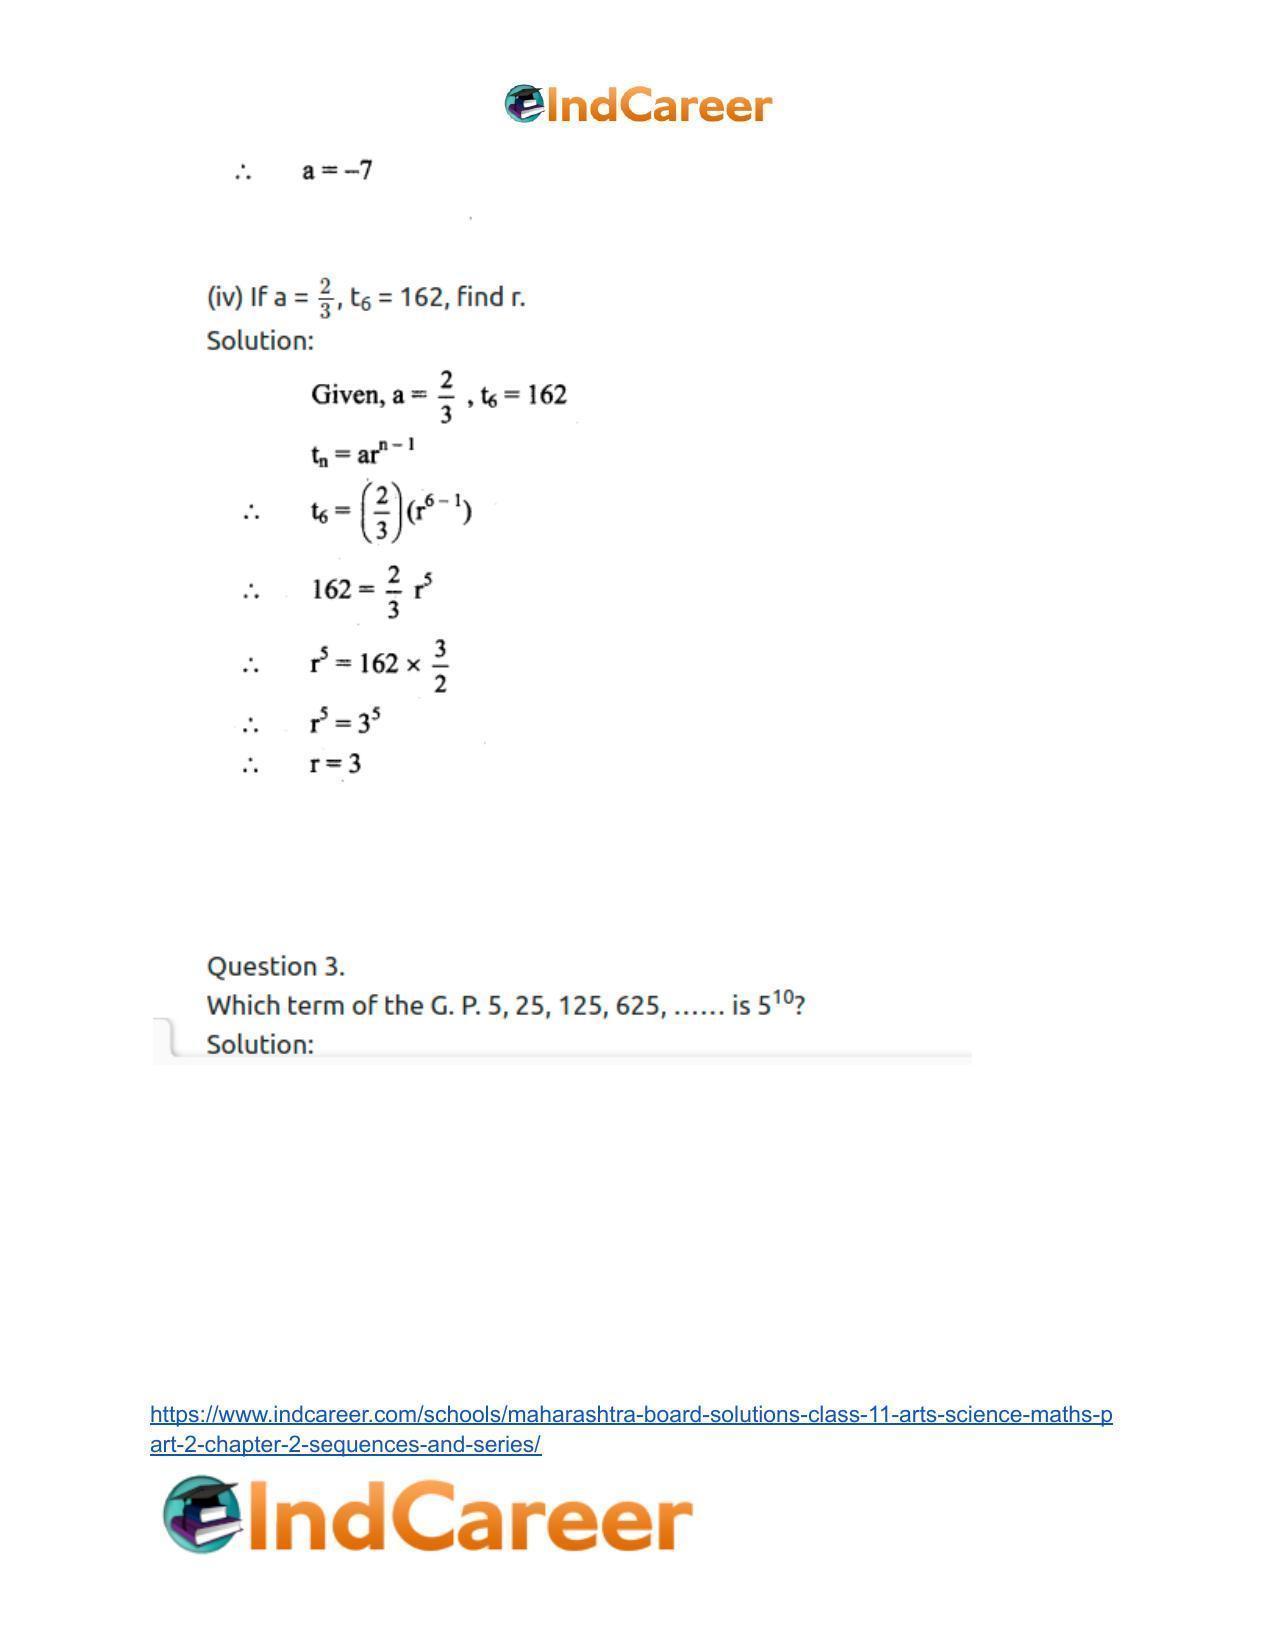 Maharashtra Board Solutions Class 11-Arts & Science Maths (Part 2): Chapter 2- Sequences and Series - Page 8